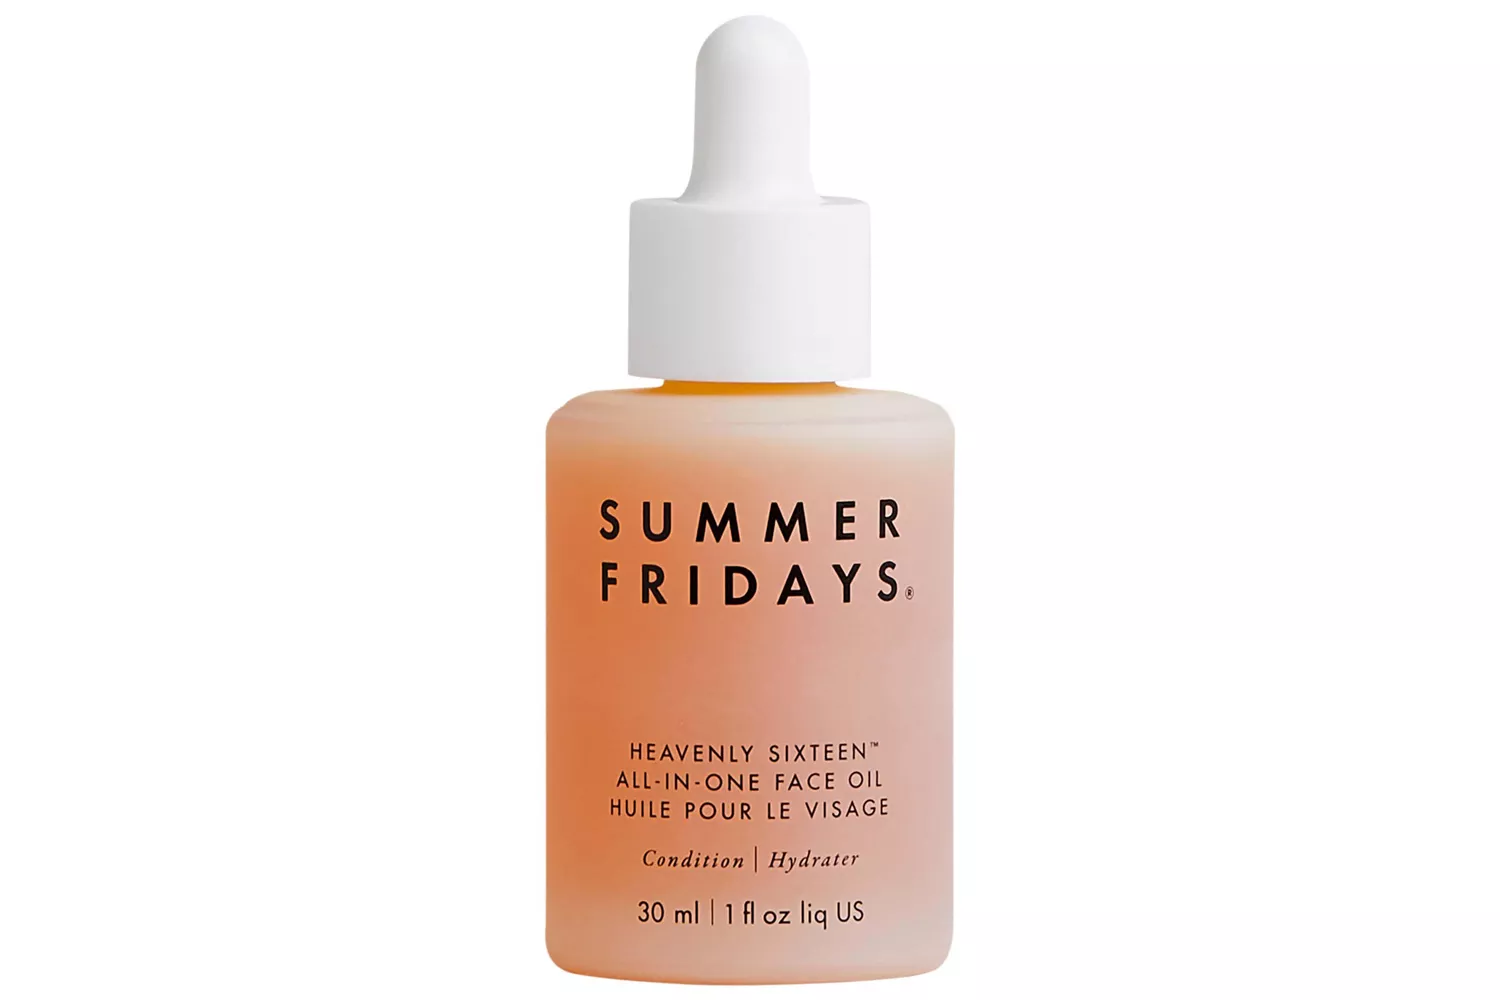 Summer Fridays Heavenly Sixteen All-in-One Face Oil